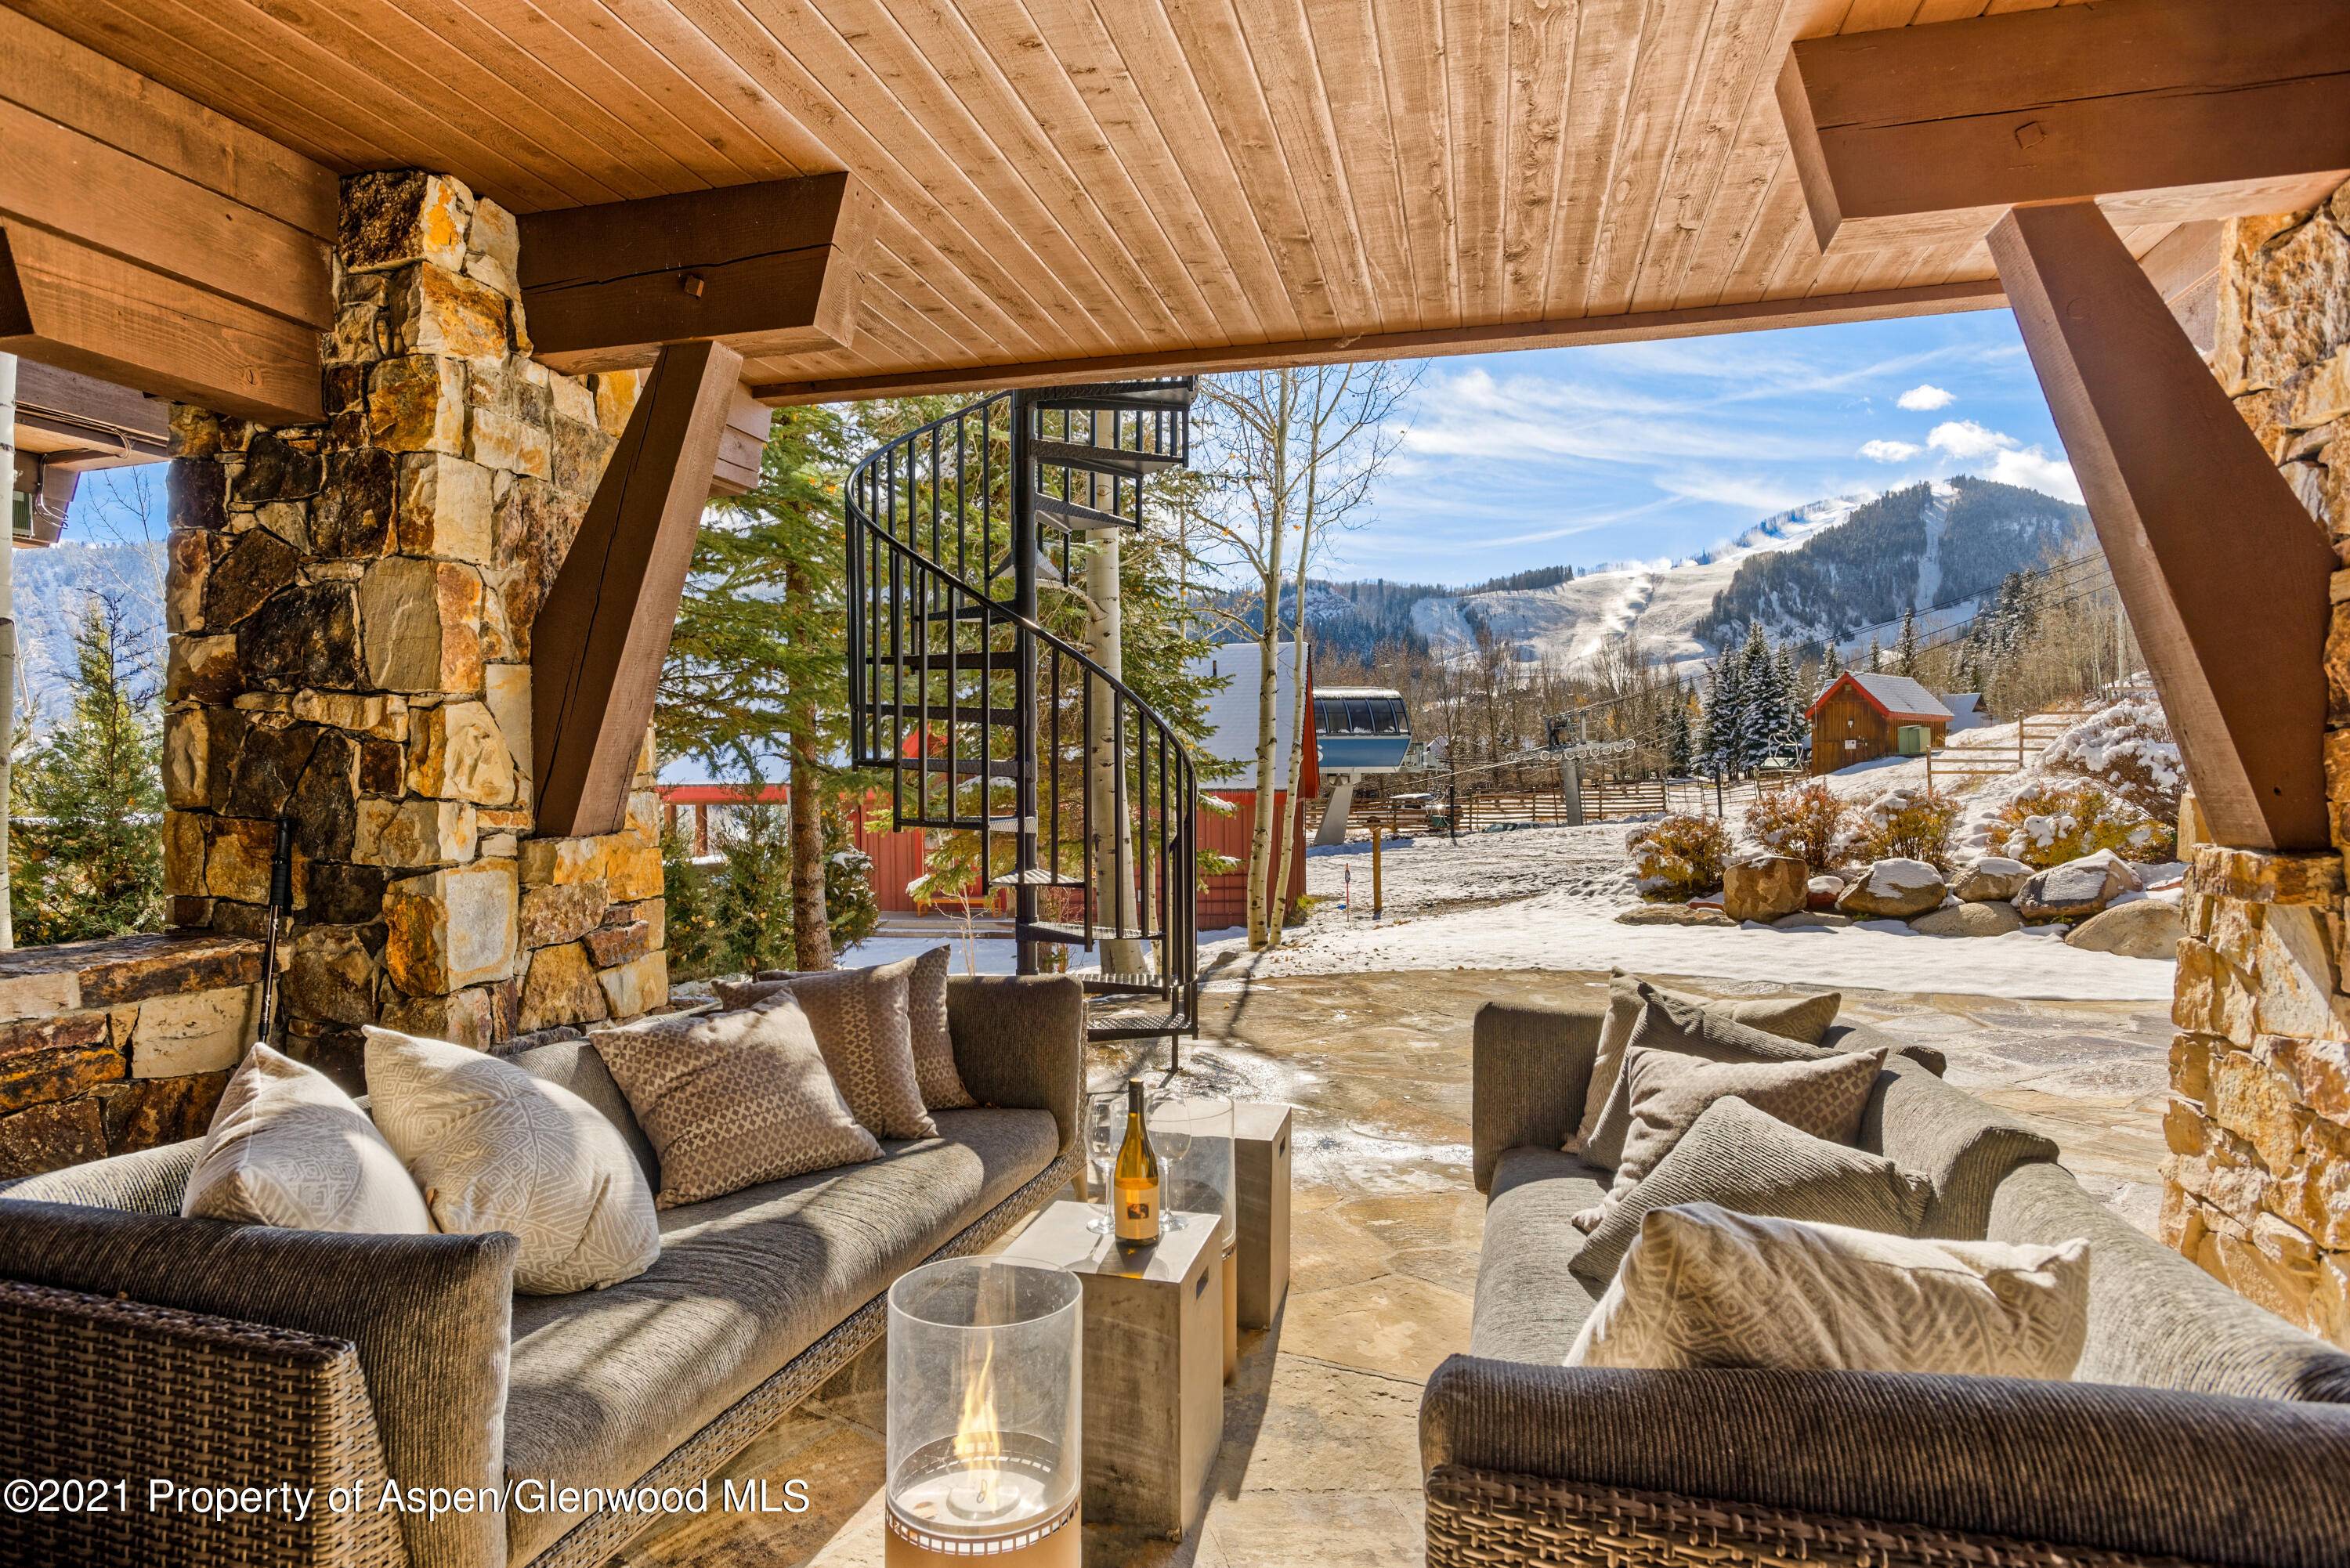 Just steps from the Tiehack lift, this 4 bedroom townhome is the ultimate ski in, ski out property.